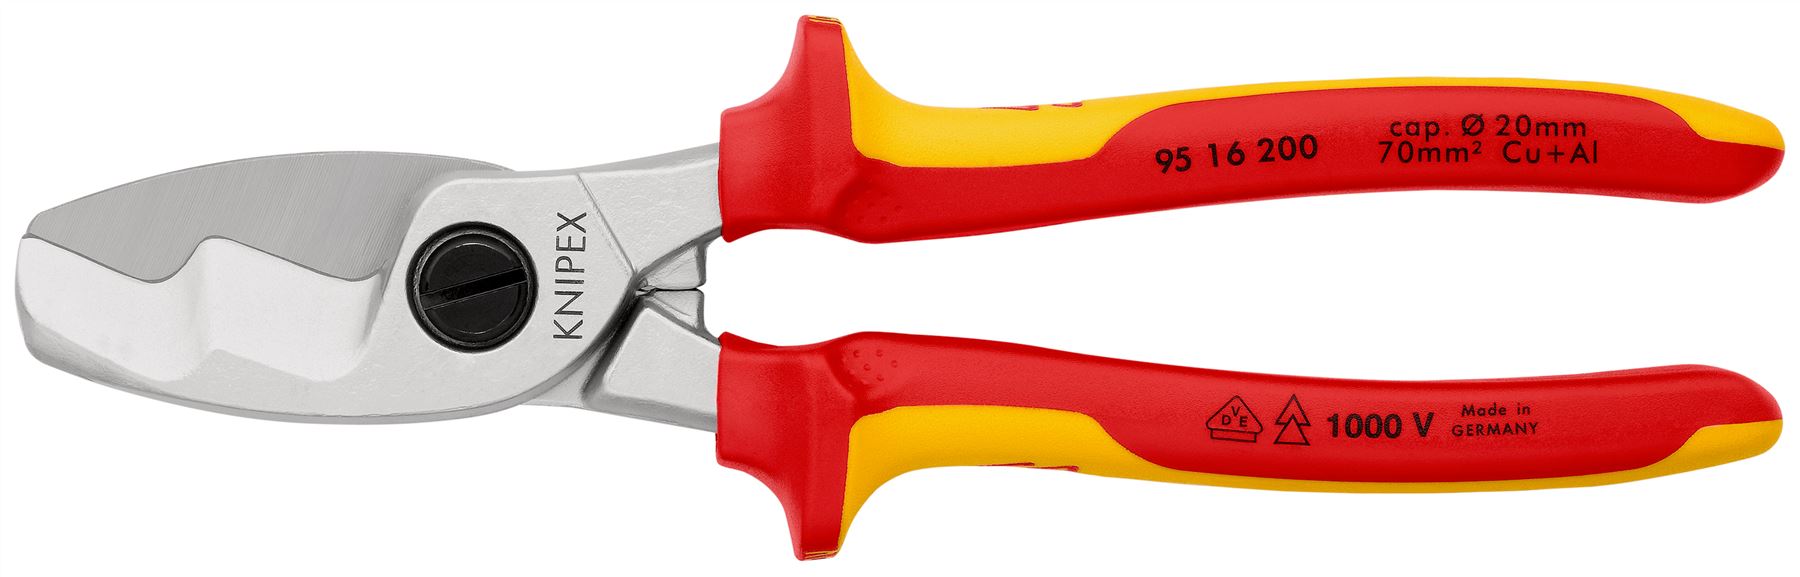 Knipex Cable Shears with Twin Cutting Edge 200mm VDE Insulated 95 16 200